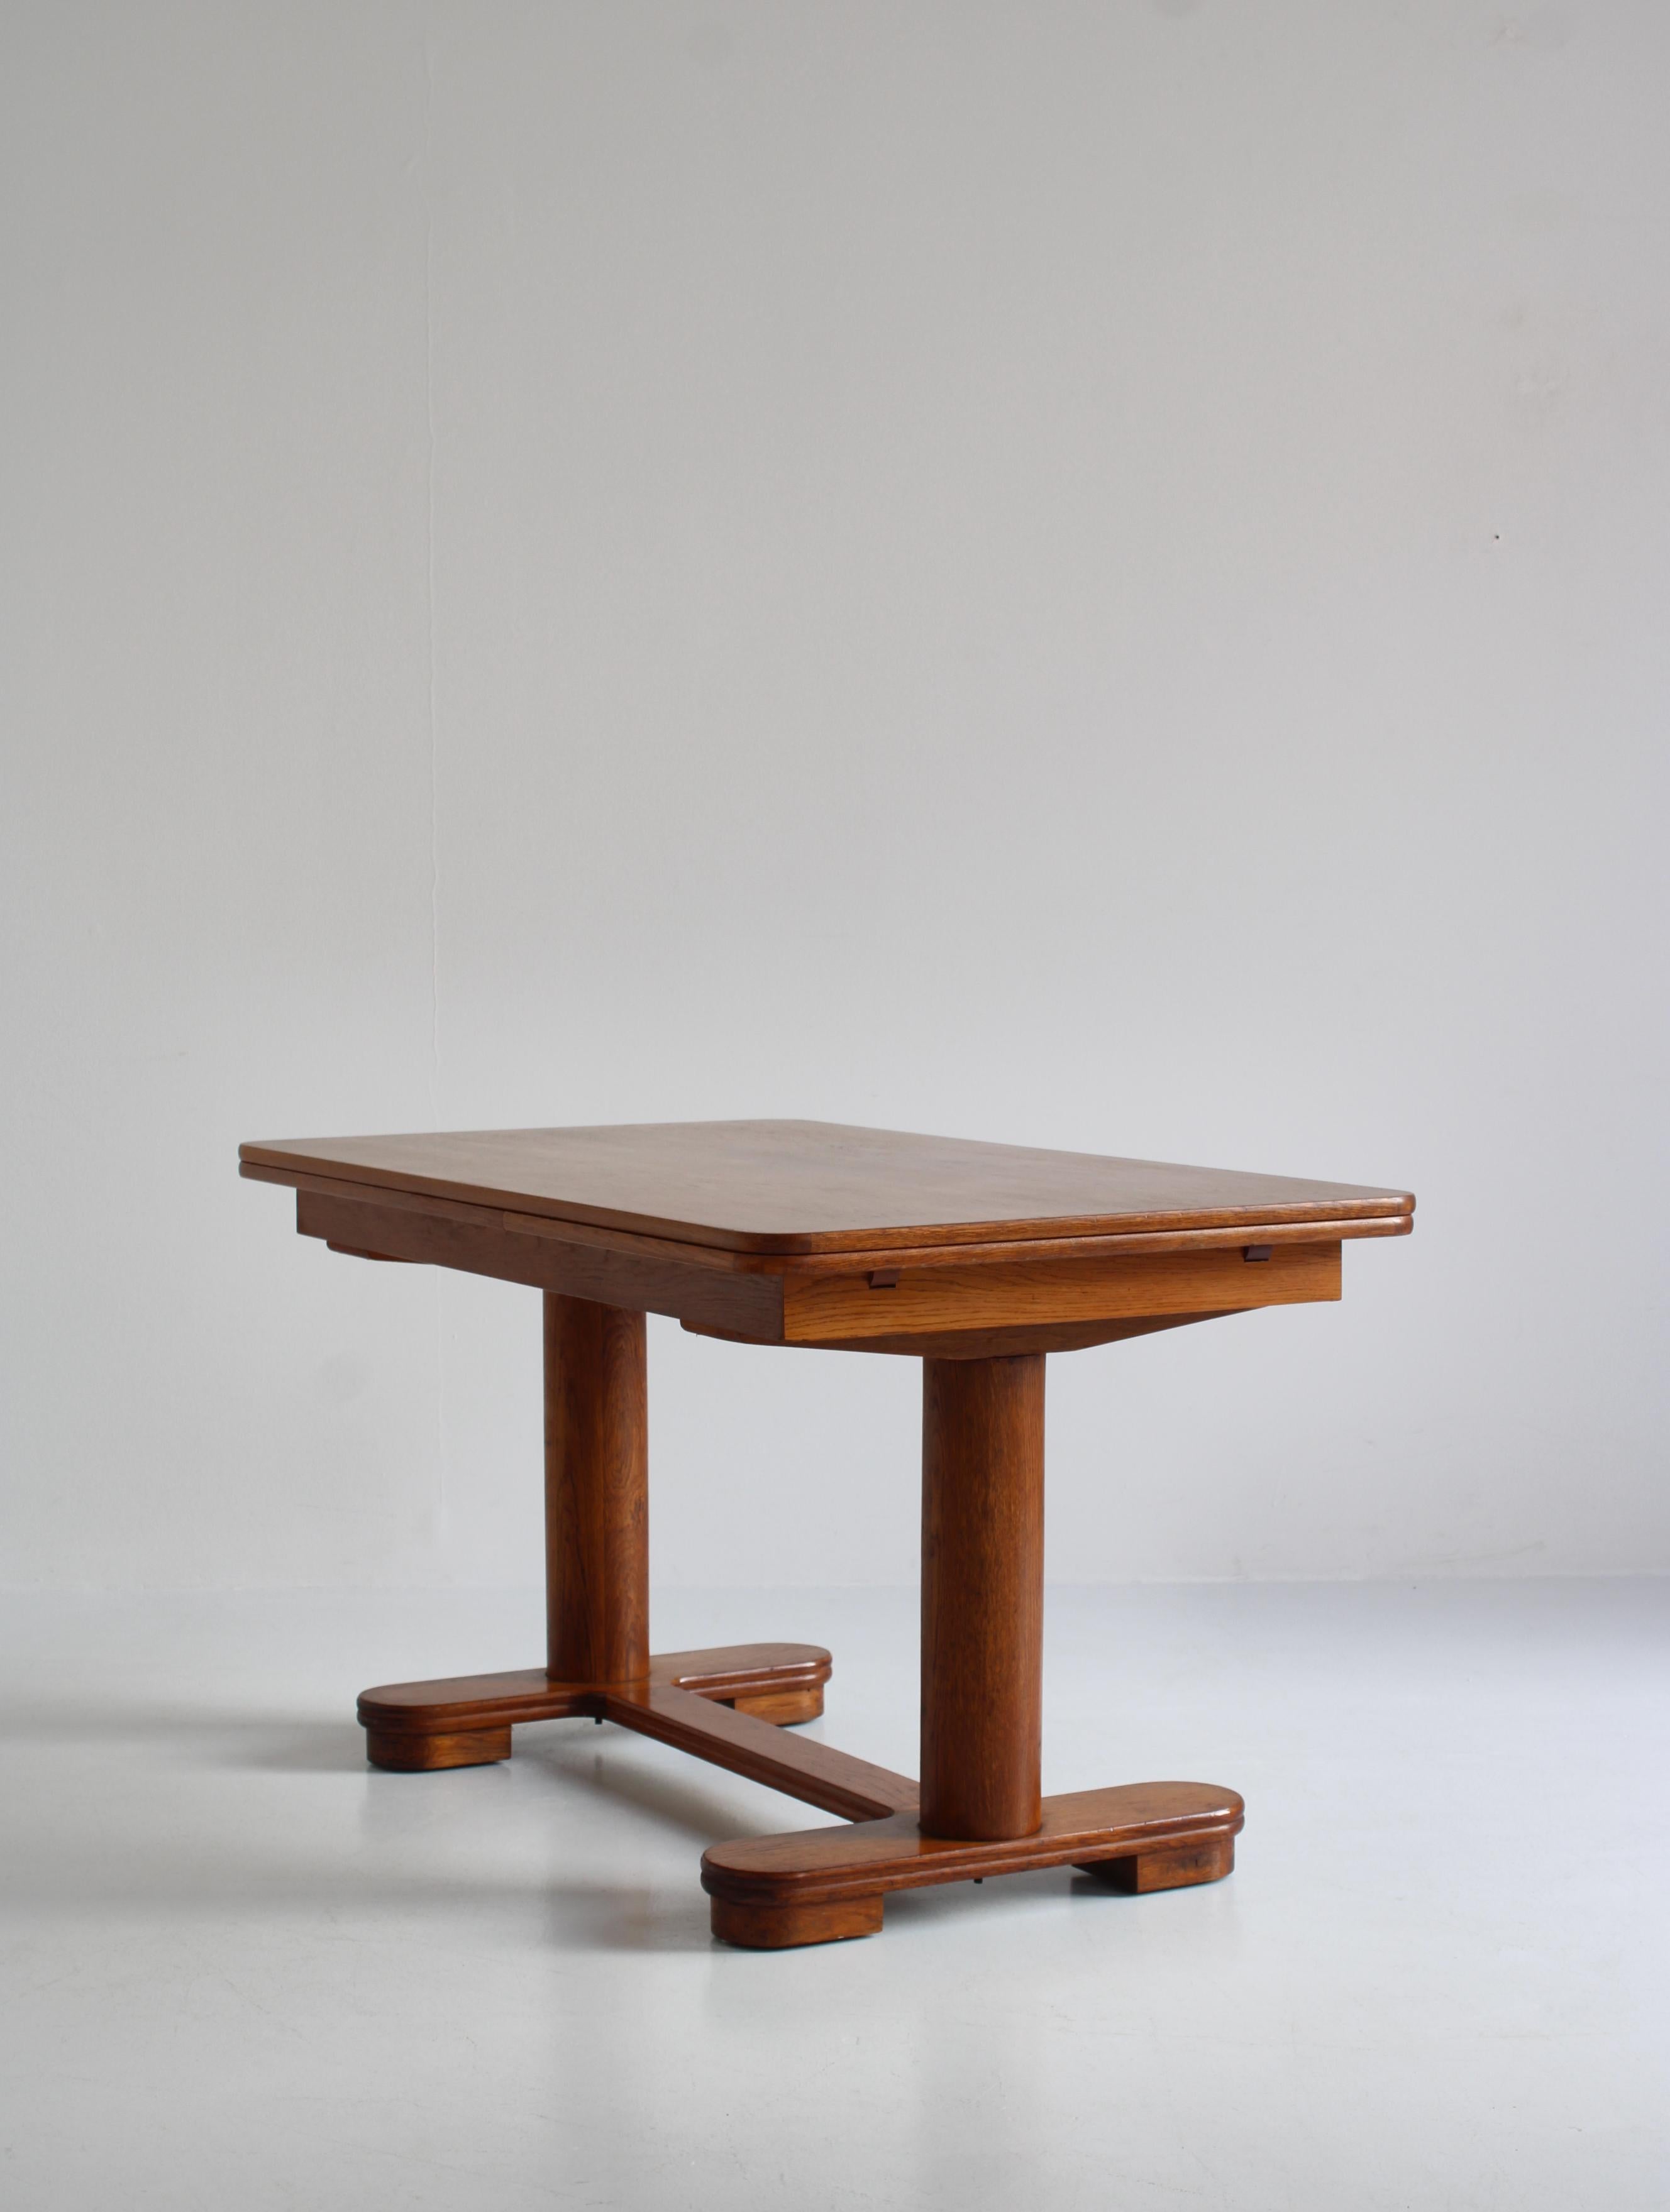 Mid-20th Century Art Deco Table by Danish Cabinetmaker in Patinated Oak, 1930s For Sale